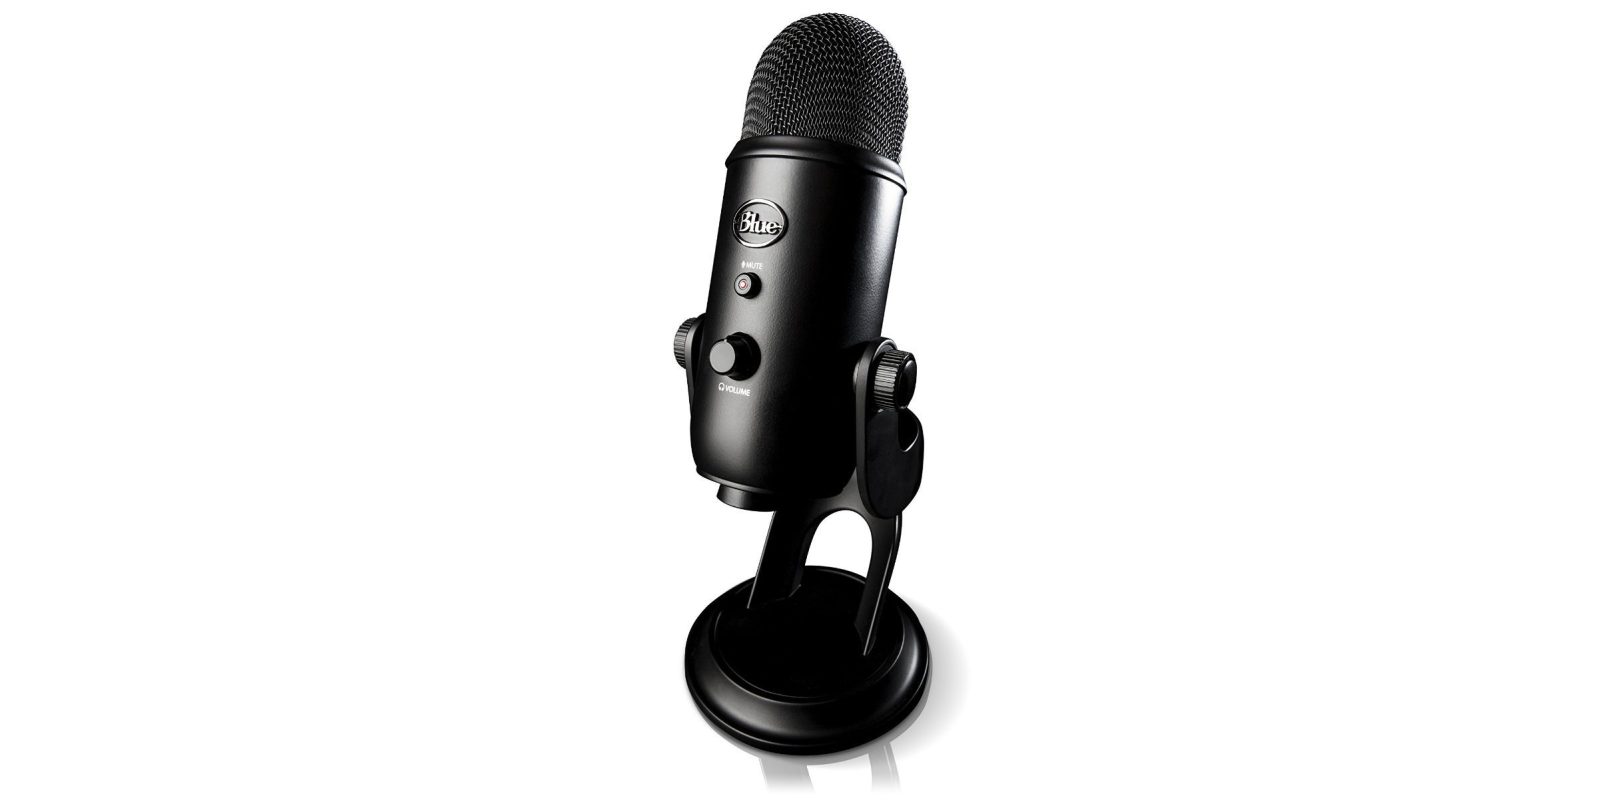 Start podcasting and recording voiceovers w/ Blue's Yeti mic for 85